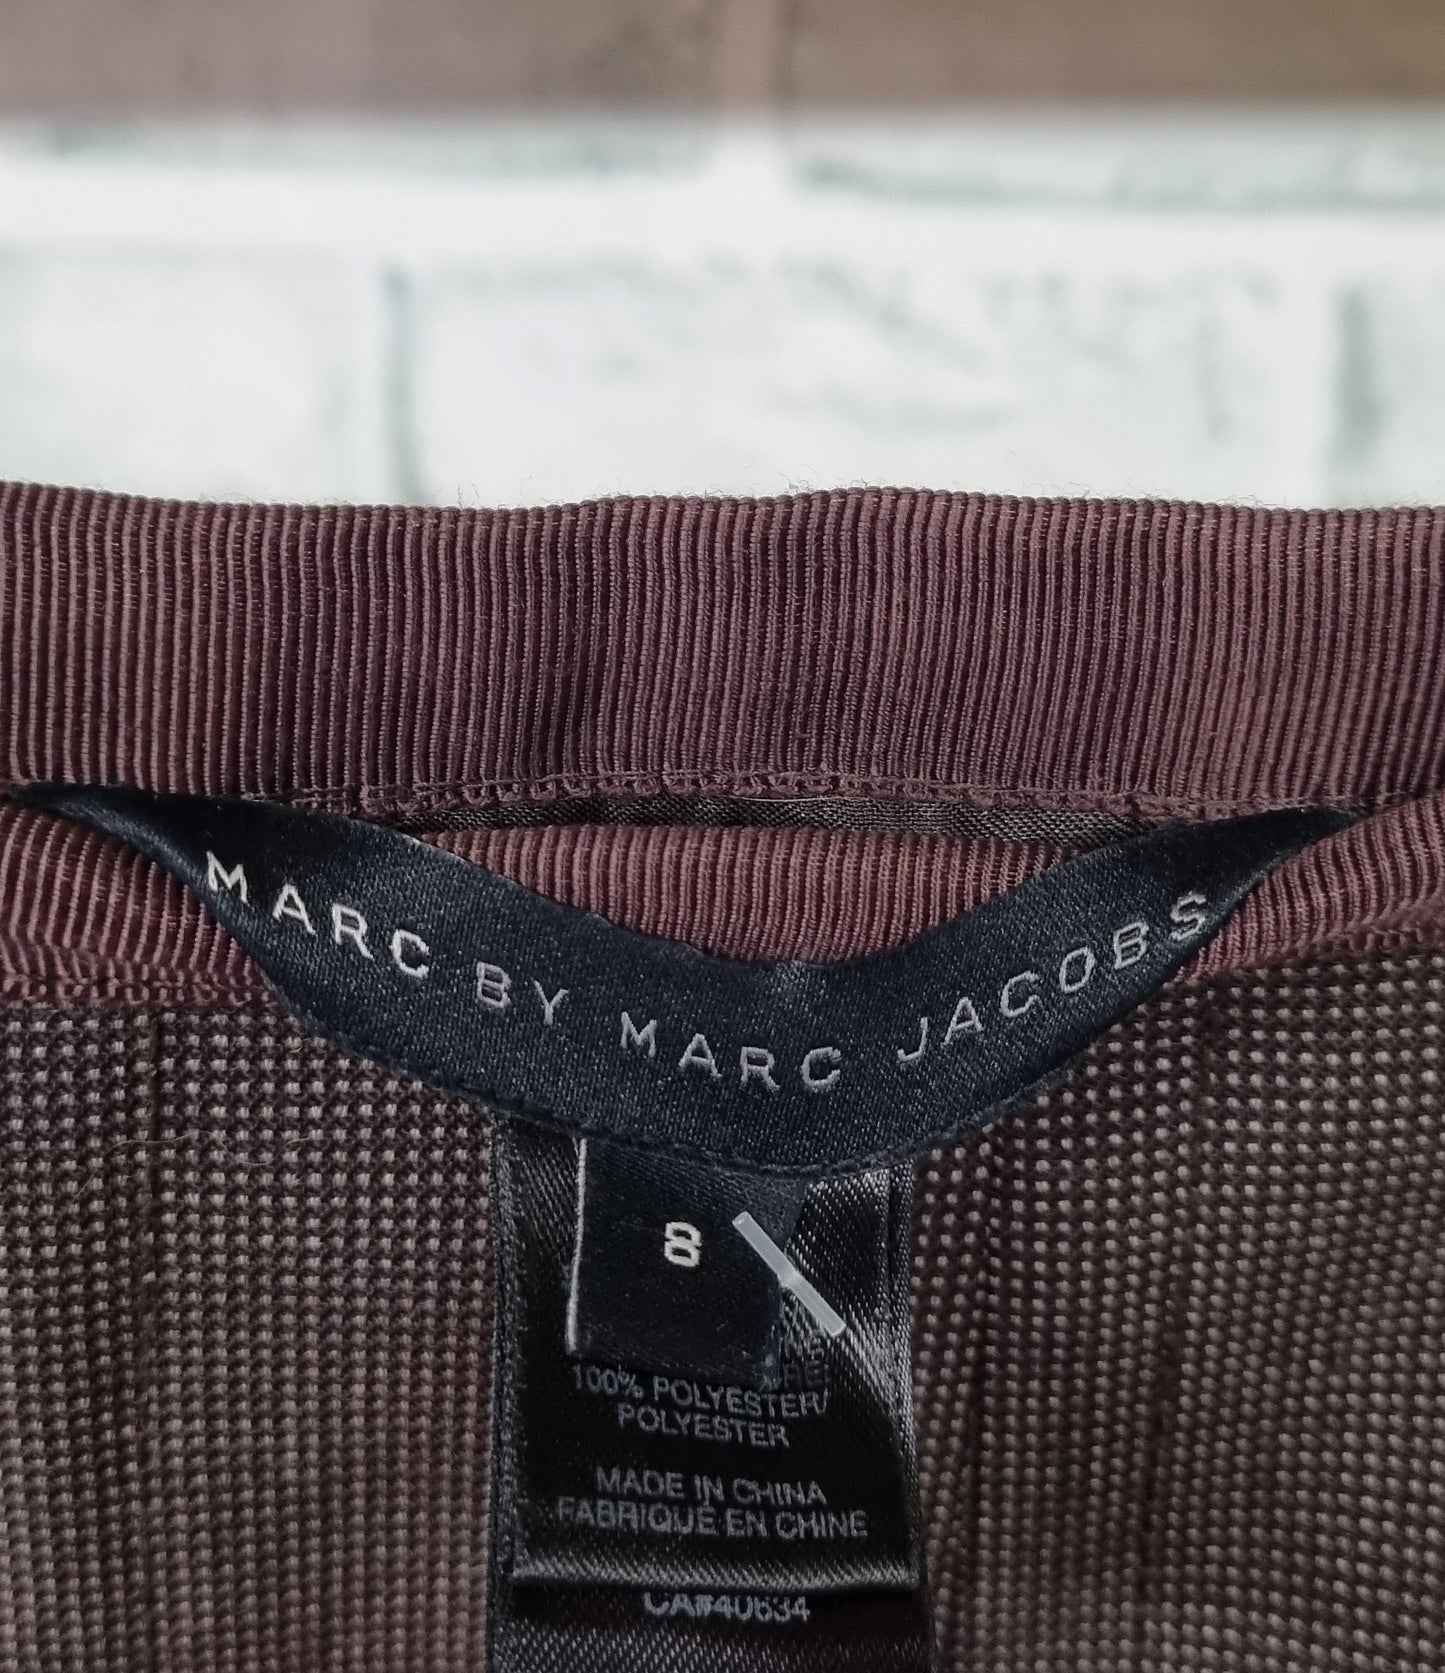 Marc by Marc Jacobs Heavy Brown Box Pleated Mini Skirt Size US 8